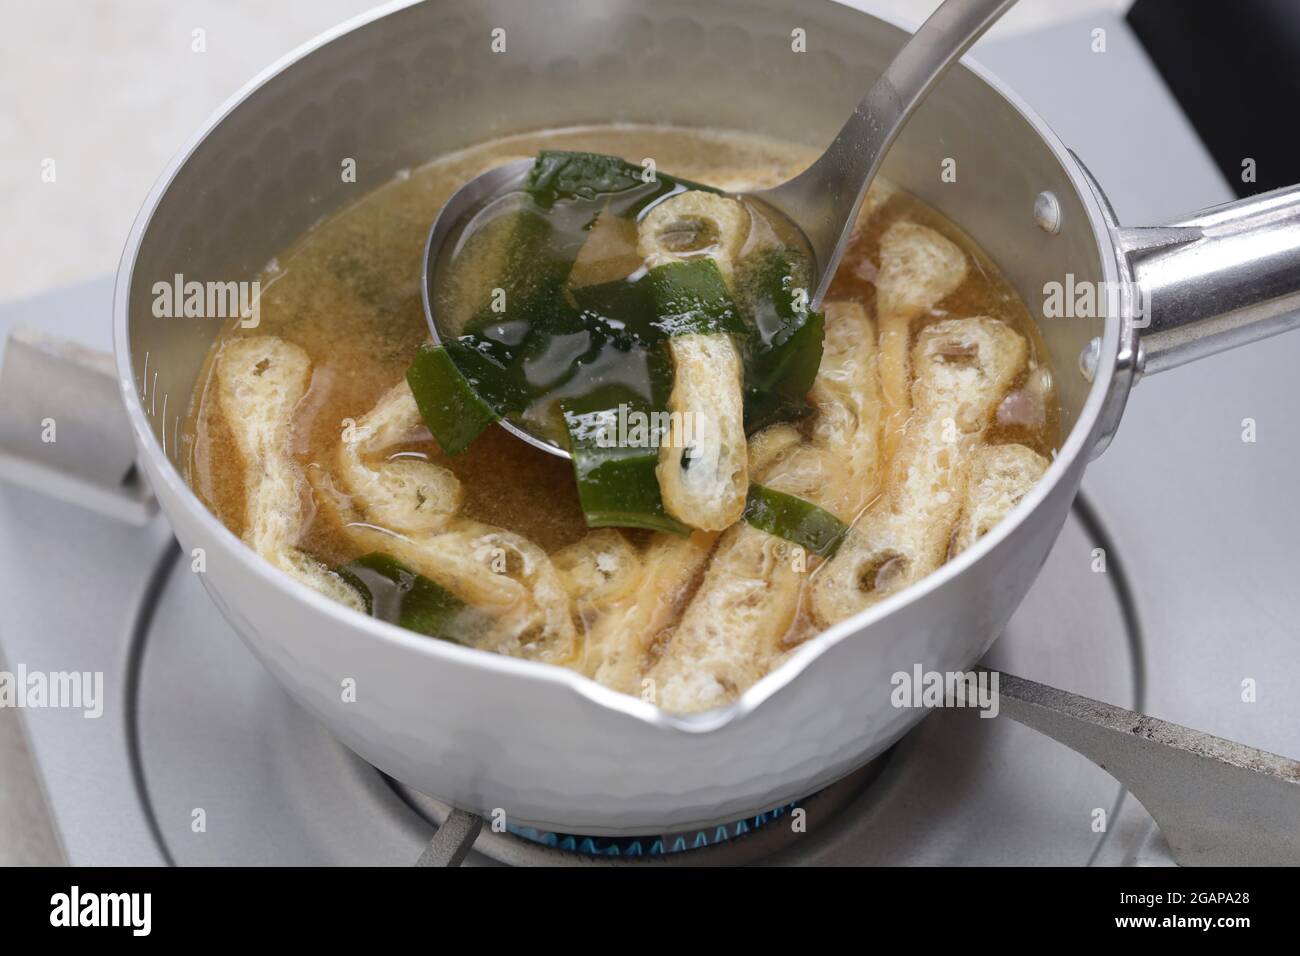 How to make Japanese miso soup.  Let’s use a ladle for miso soup. Stock Photo